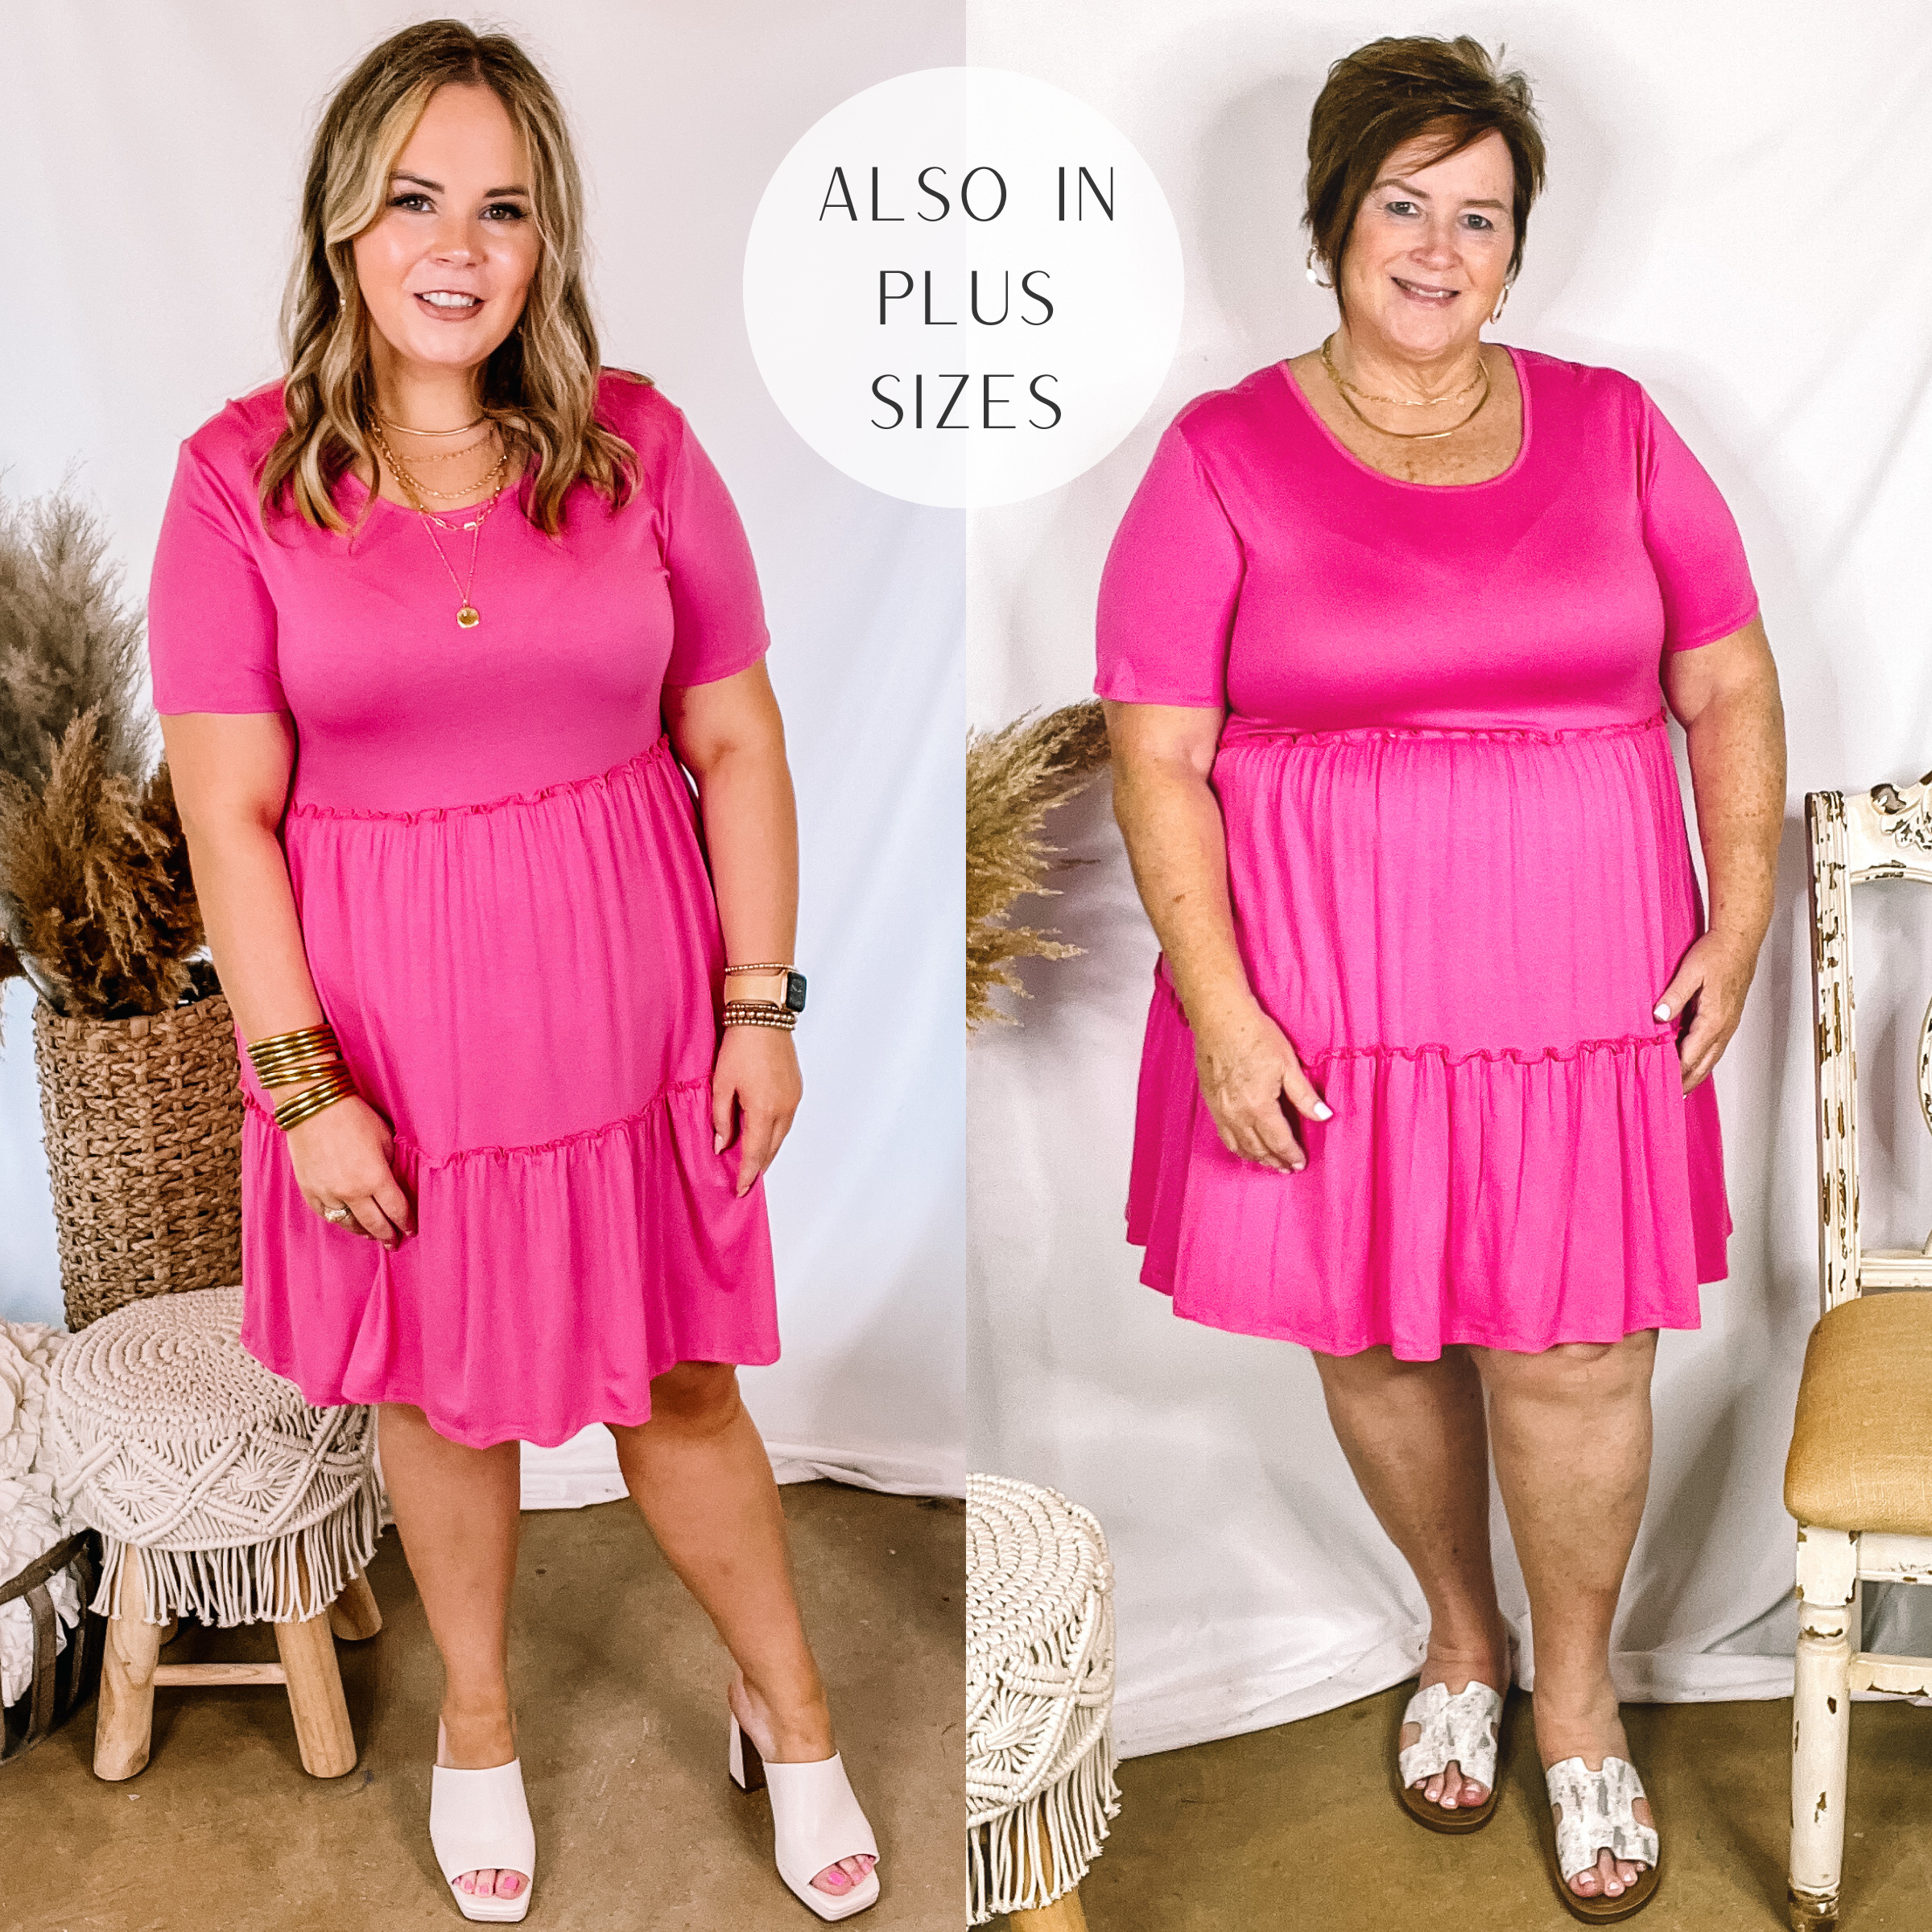 Models are wearing a pink tiered dress with short sleeves. Size large model has it paired with white heels and gold jewelry. Plus size model has it paired with white sandals and gold jewelry.